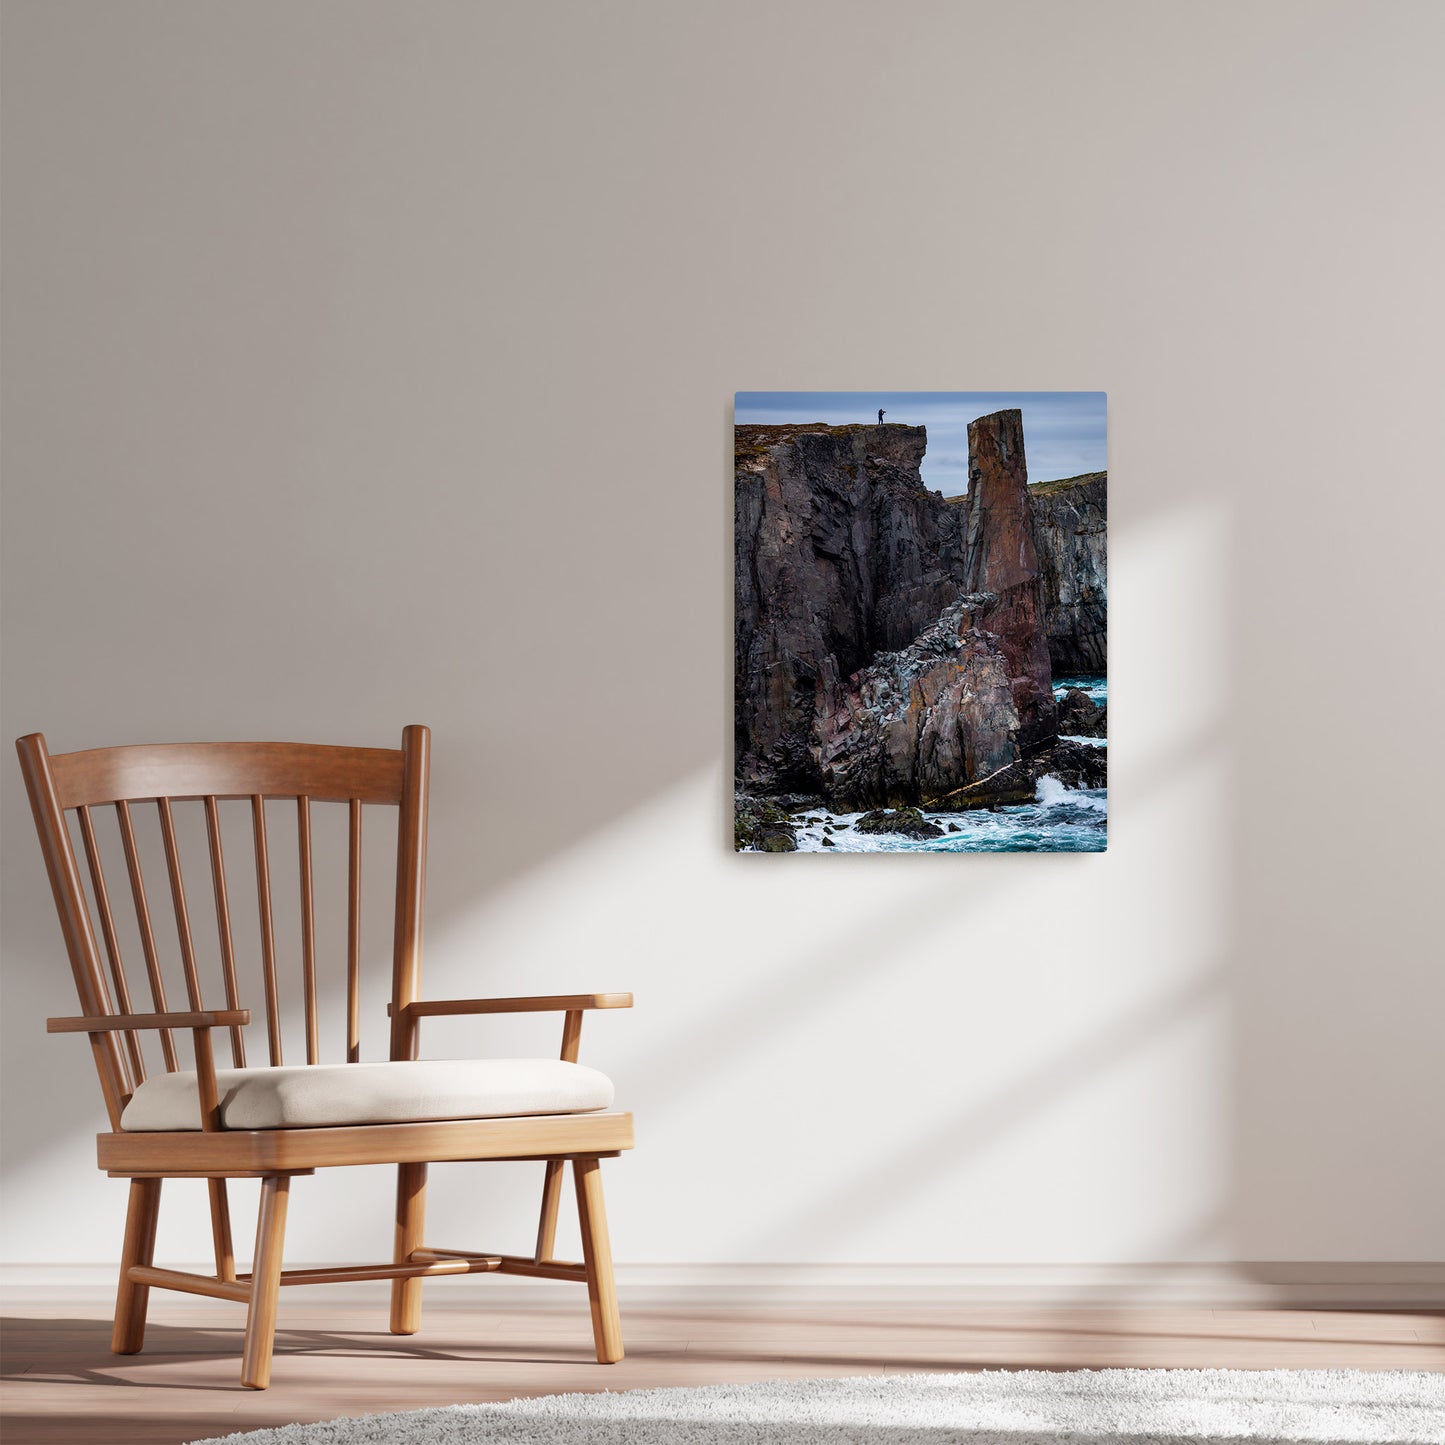 Ray Mackey's Spillars Cove Chimney photography reproduced on HD metal print and displayed on wall